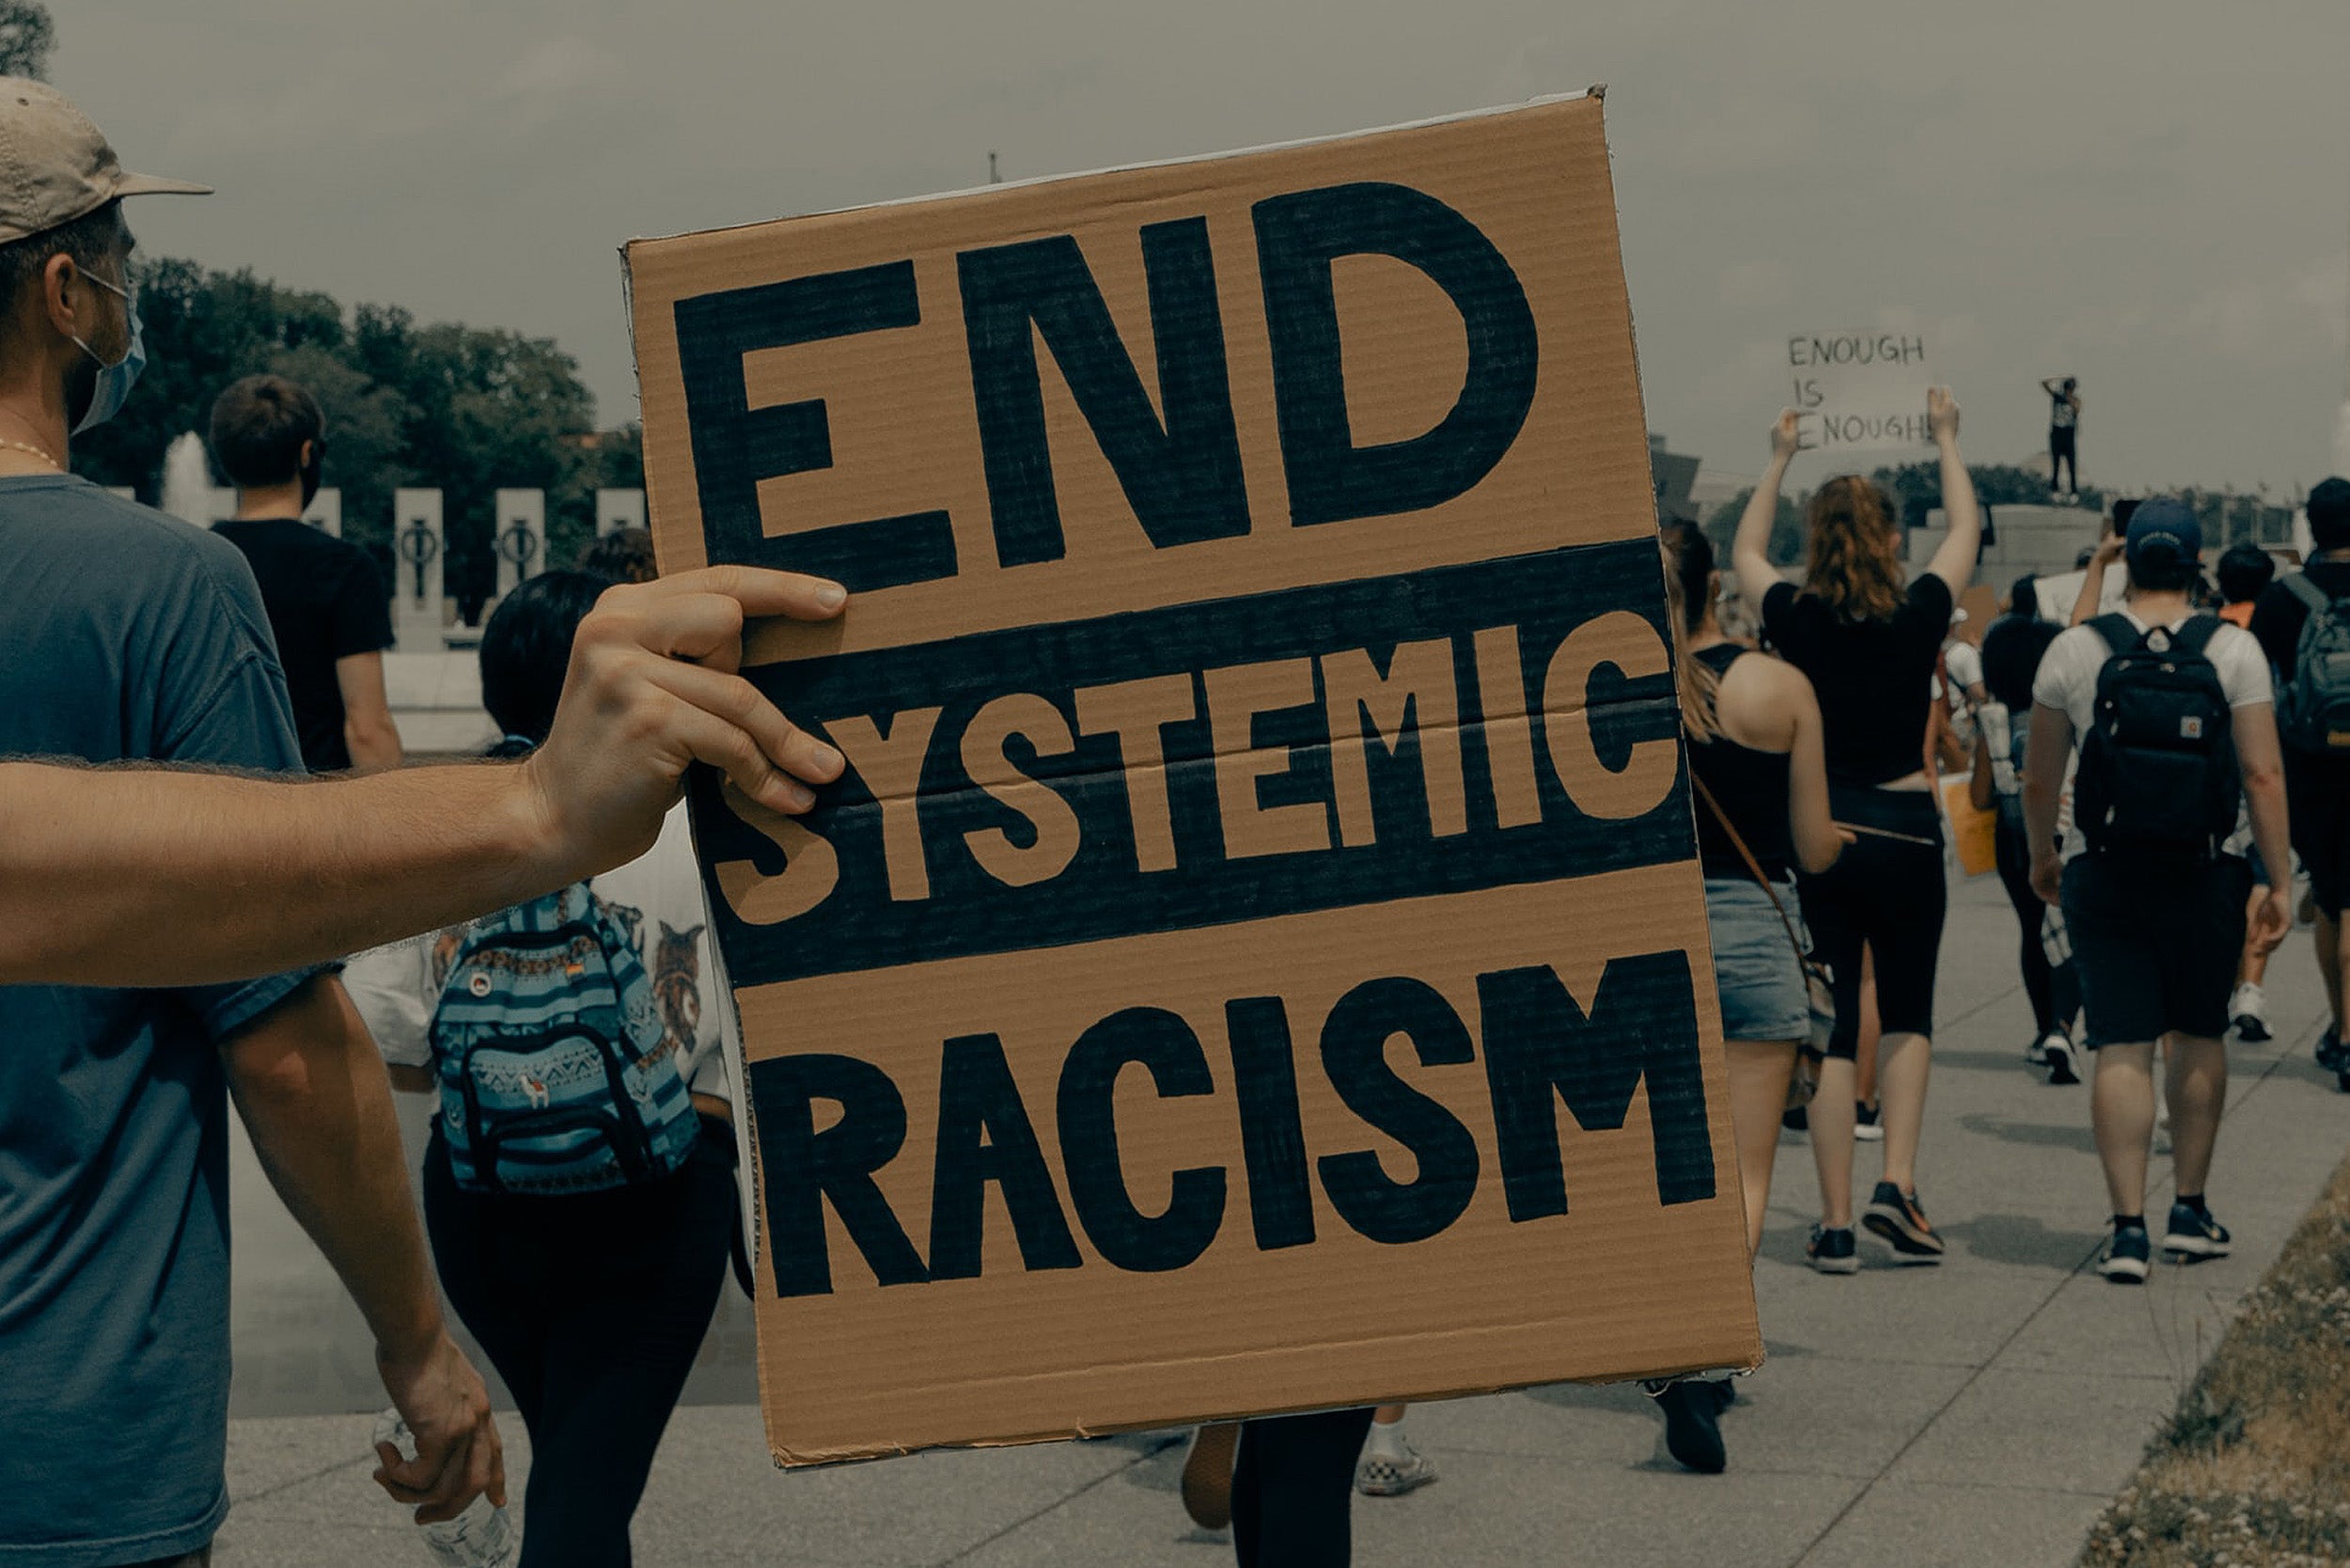 Person holding sign at a protest.